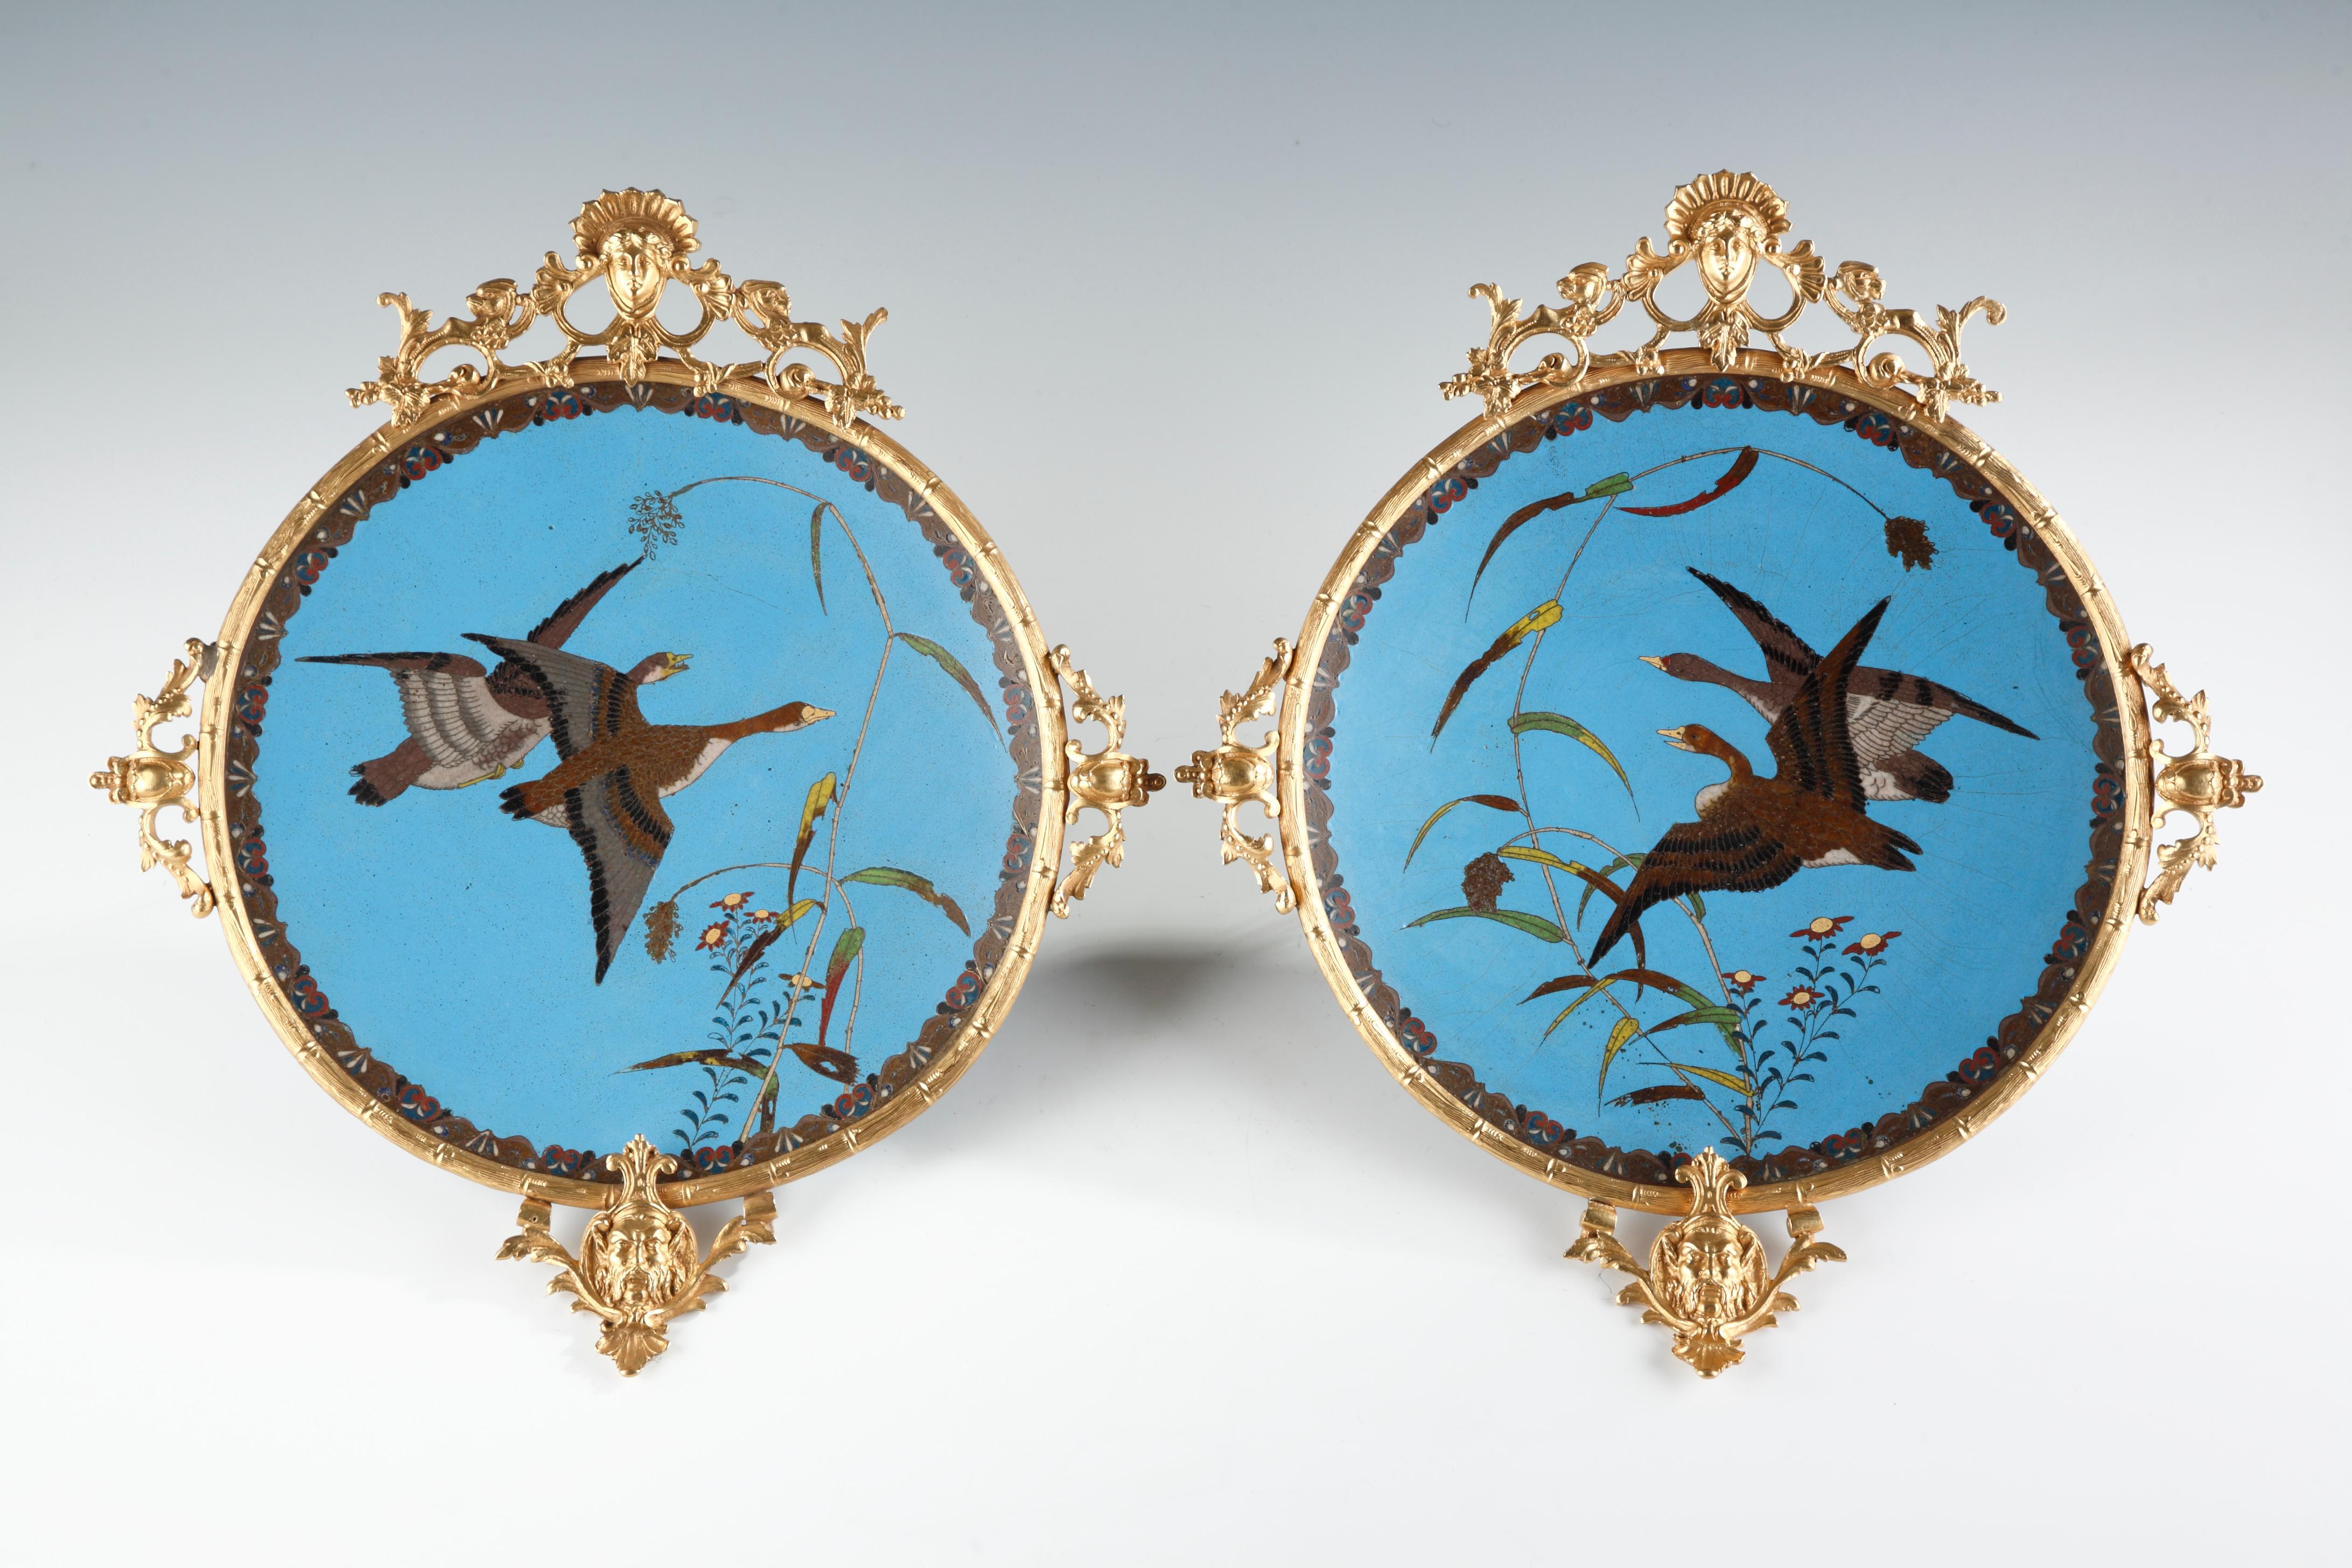 Beautiful pair of polychrome “cloisonné” enamel display dishes attributed to A. Giroux, decorated with birds flying over rushes and flowers on a sky blue background, bordered with a stylized foliate motif frieze. Finely mounted with gilded bronze